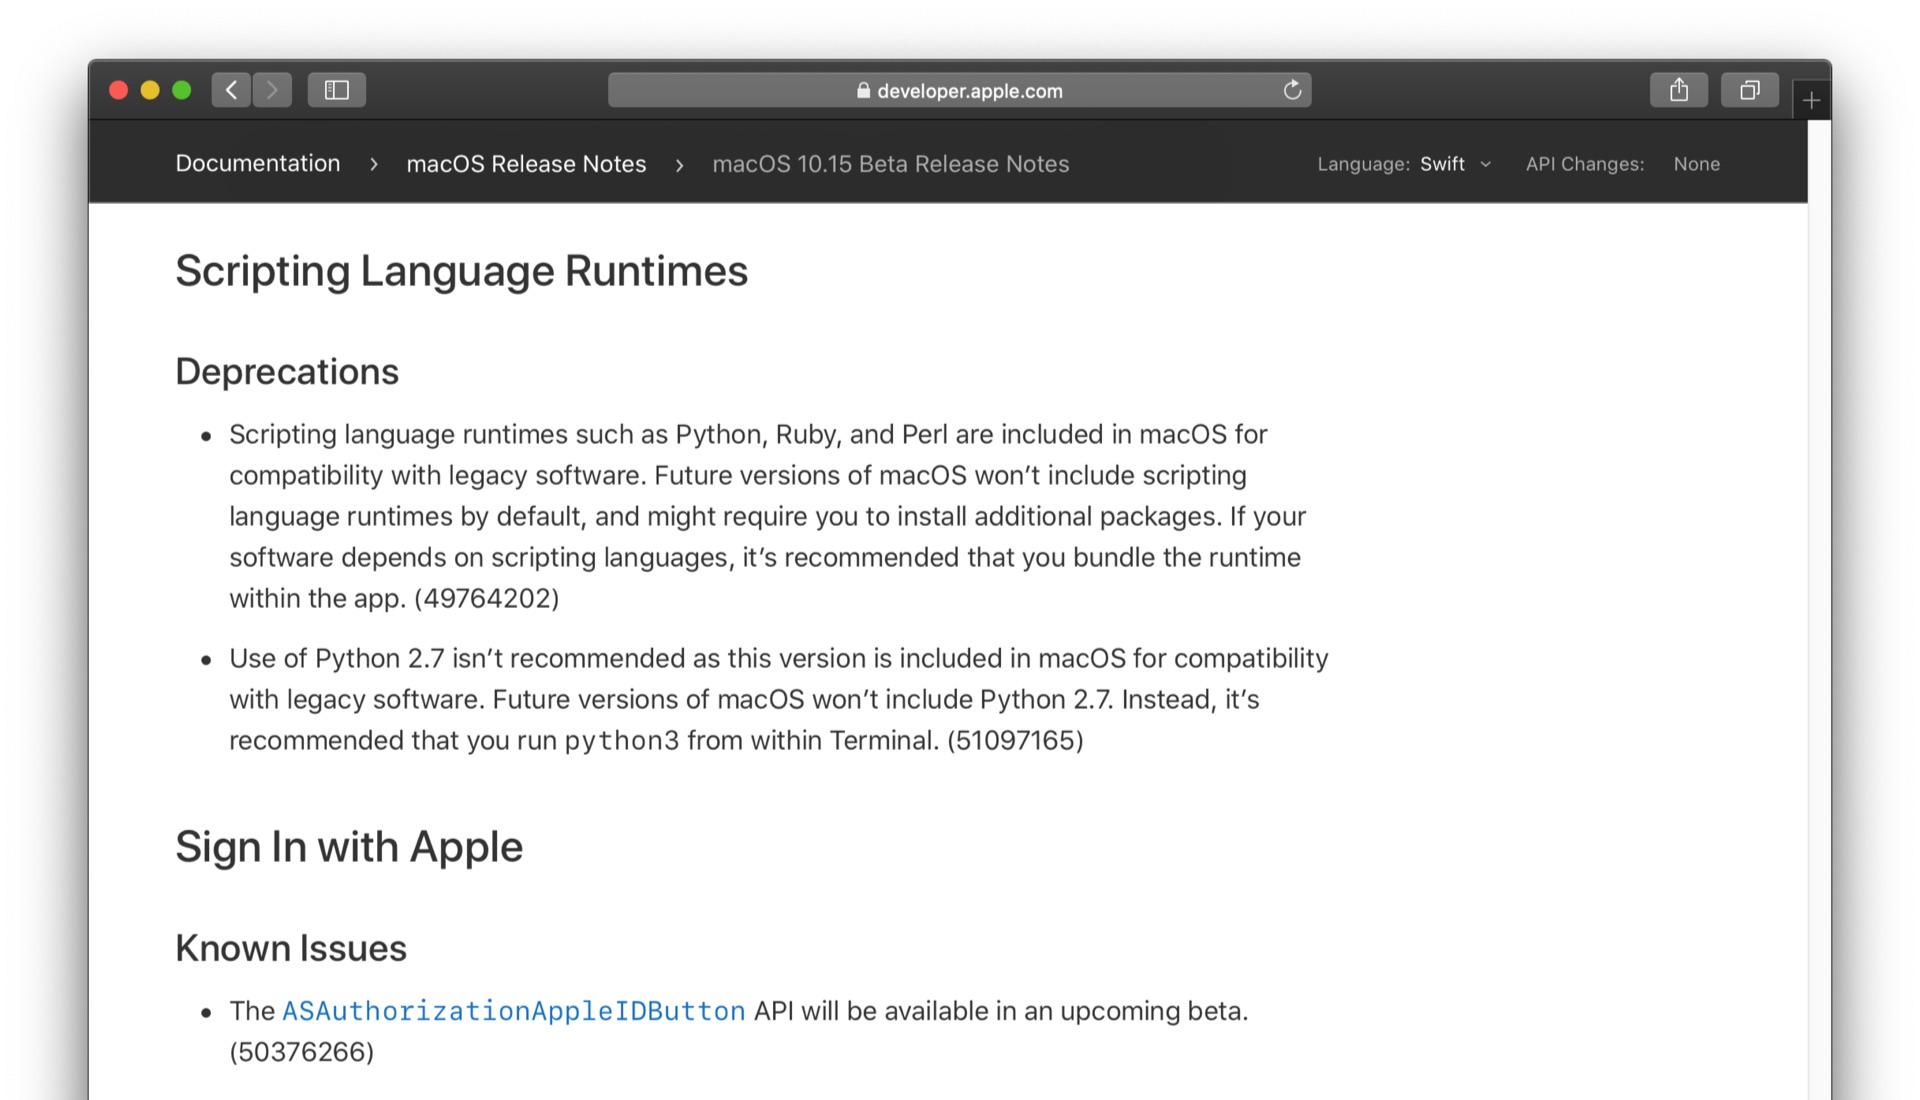 Future versions of macOS wont include scripting language runtimes by default